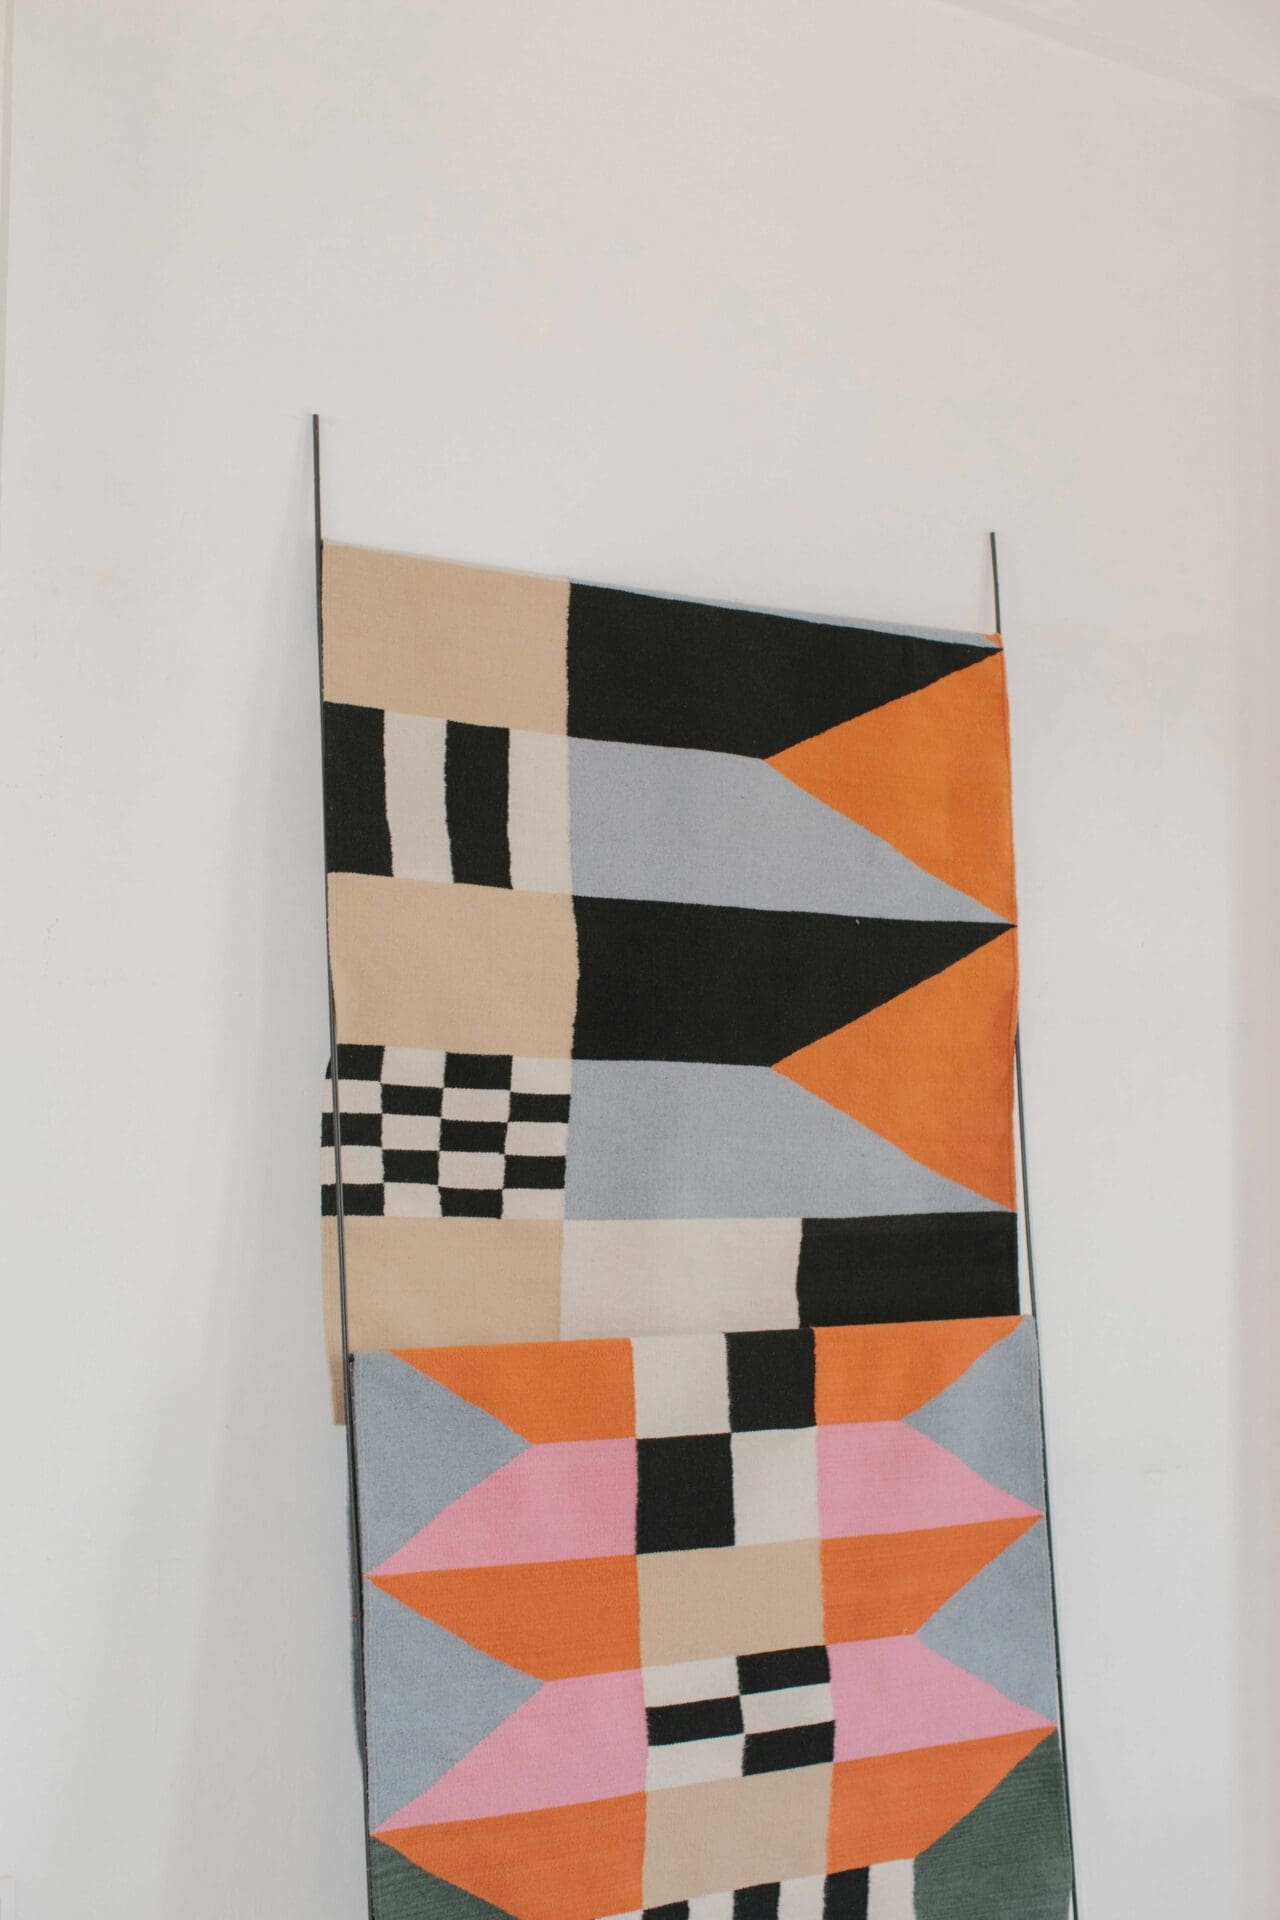 A graphically patterned rug or hanging leans against the way in Javier Reyes's rrres studio